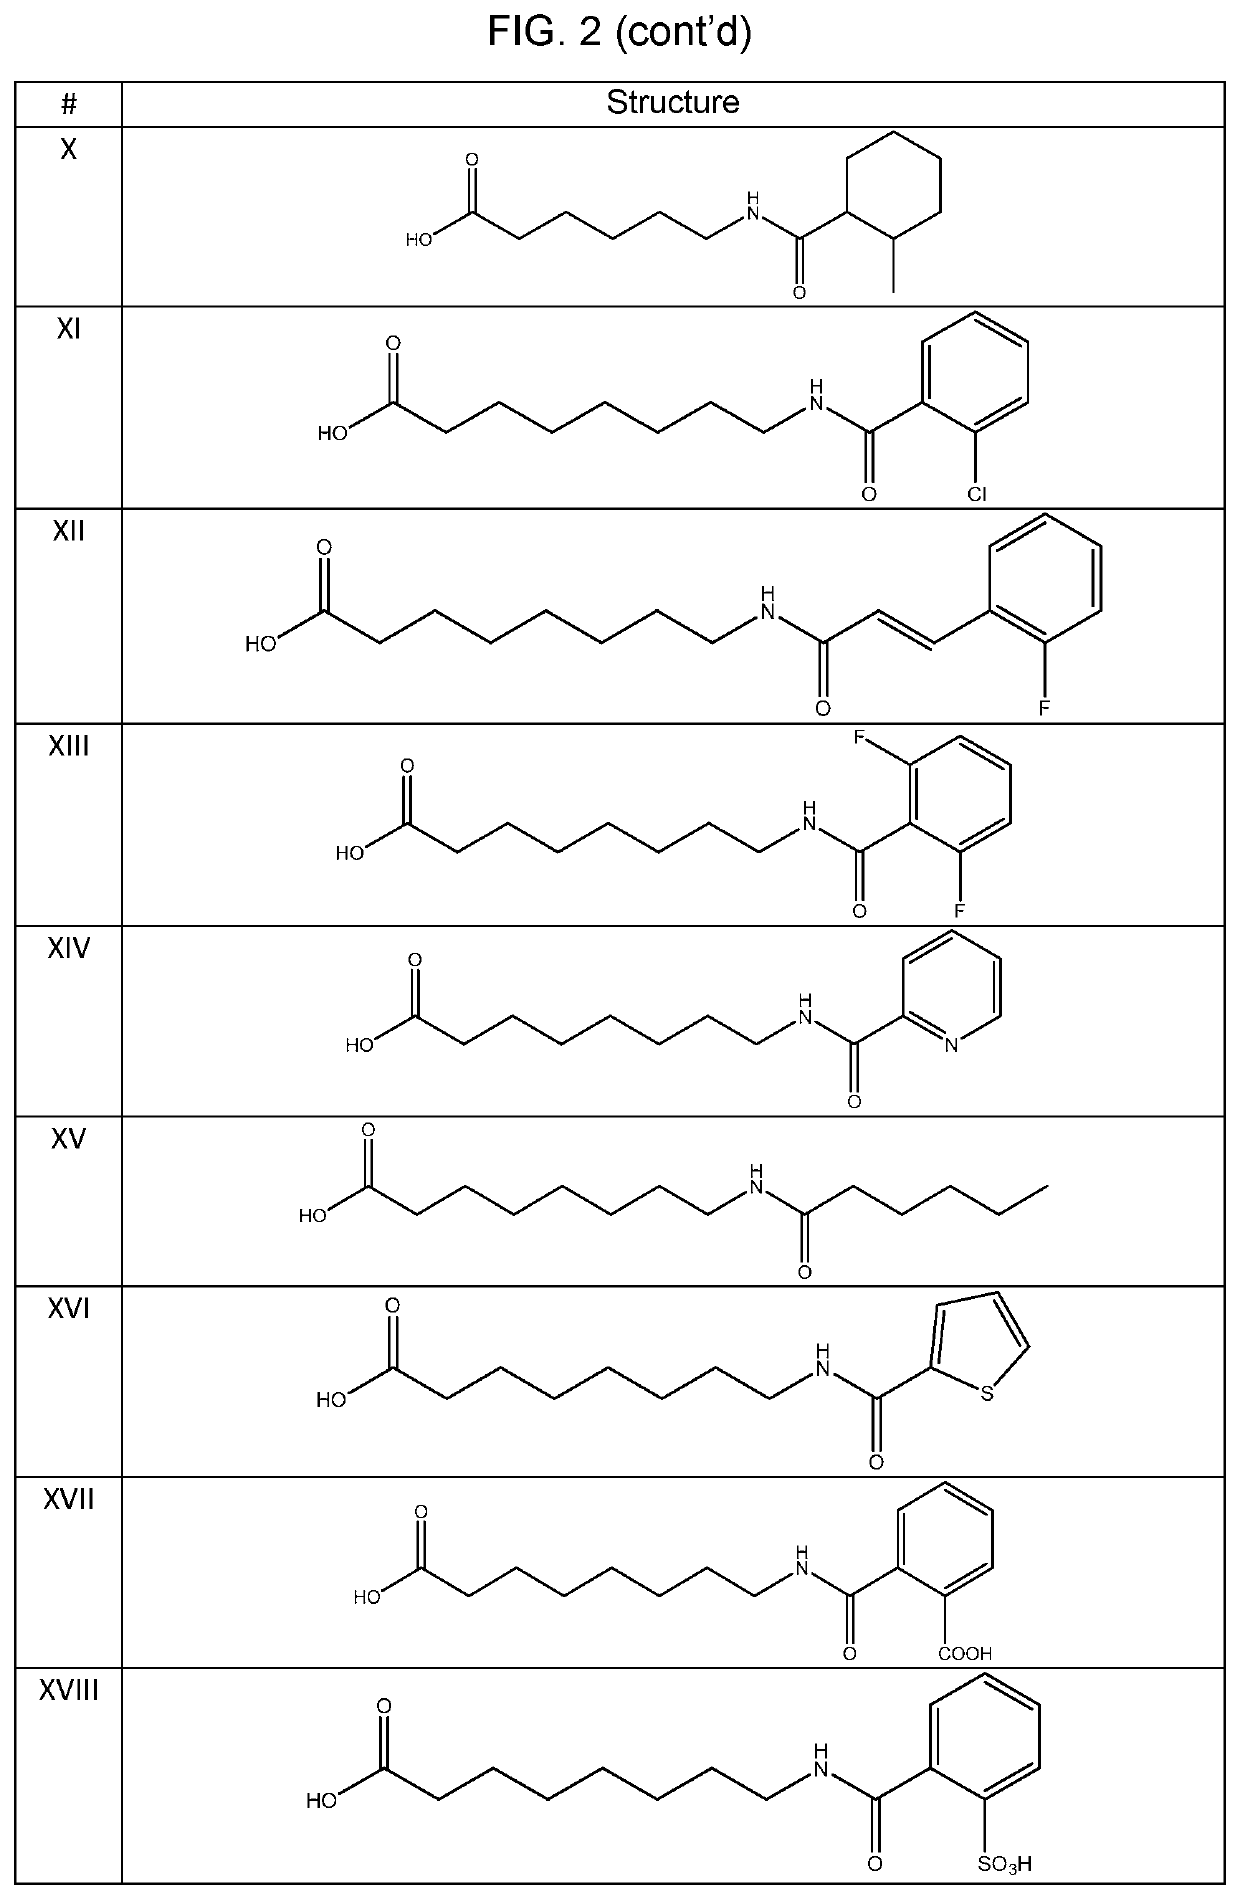 Rapid and controlled delivery of compositions with restored entourage effects